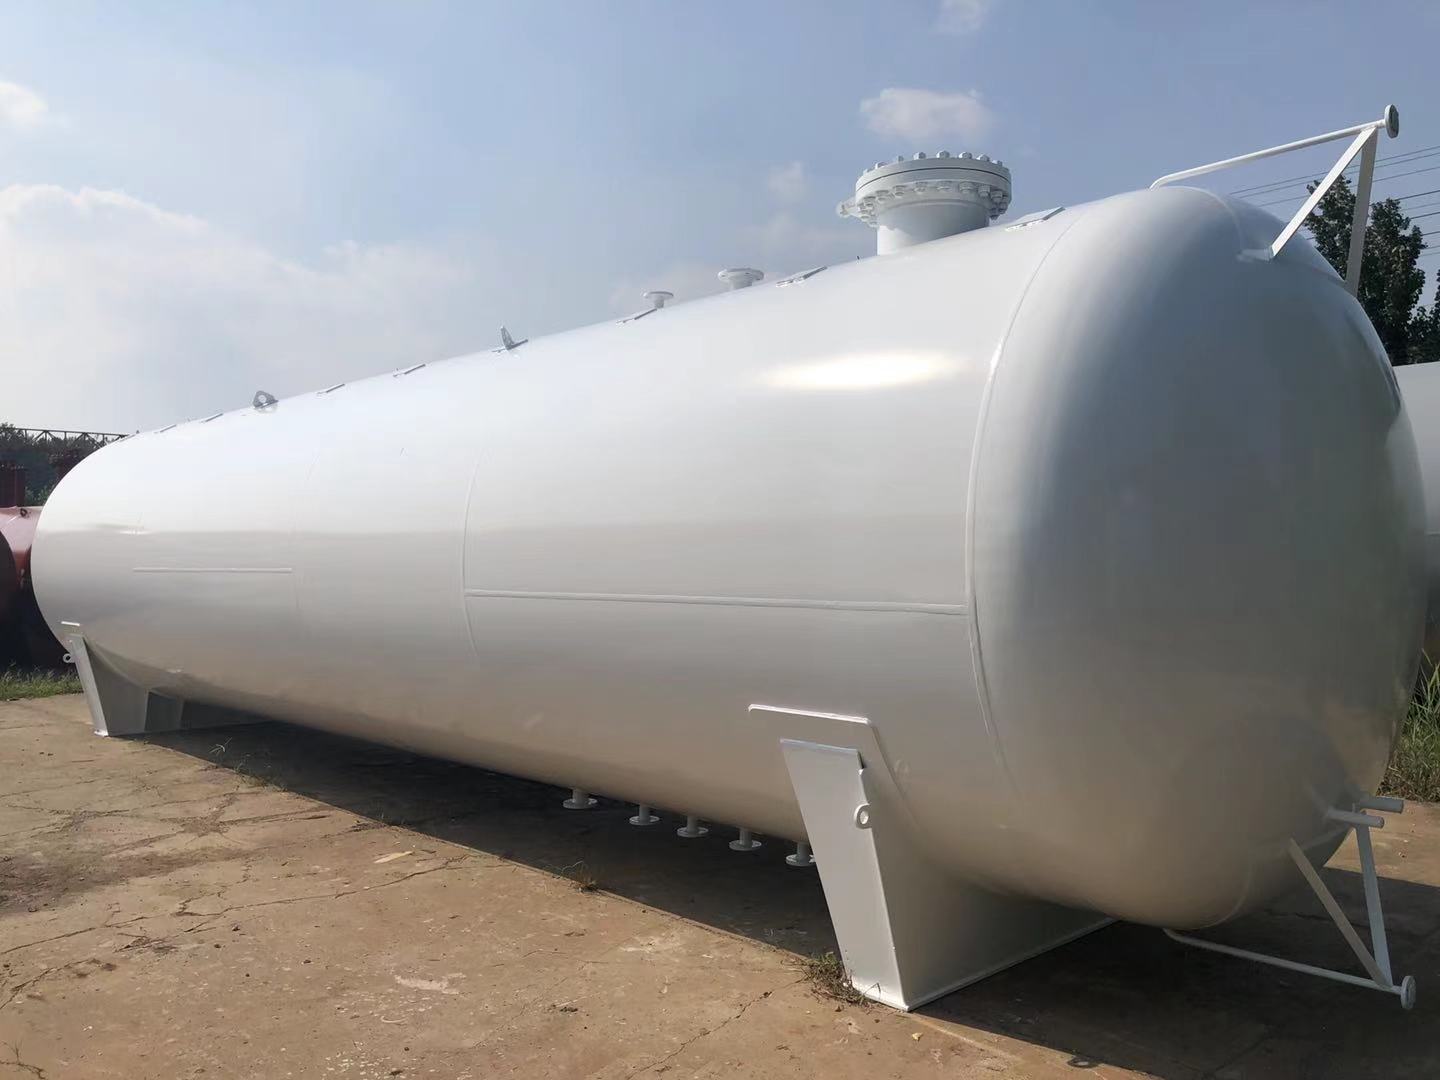 The liquefied gas storage tank is one of the important equipment for storing liquefied petroleum gas